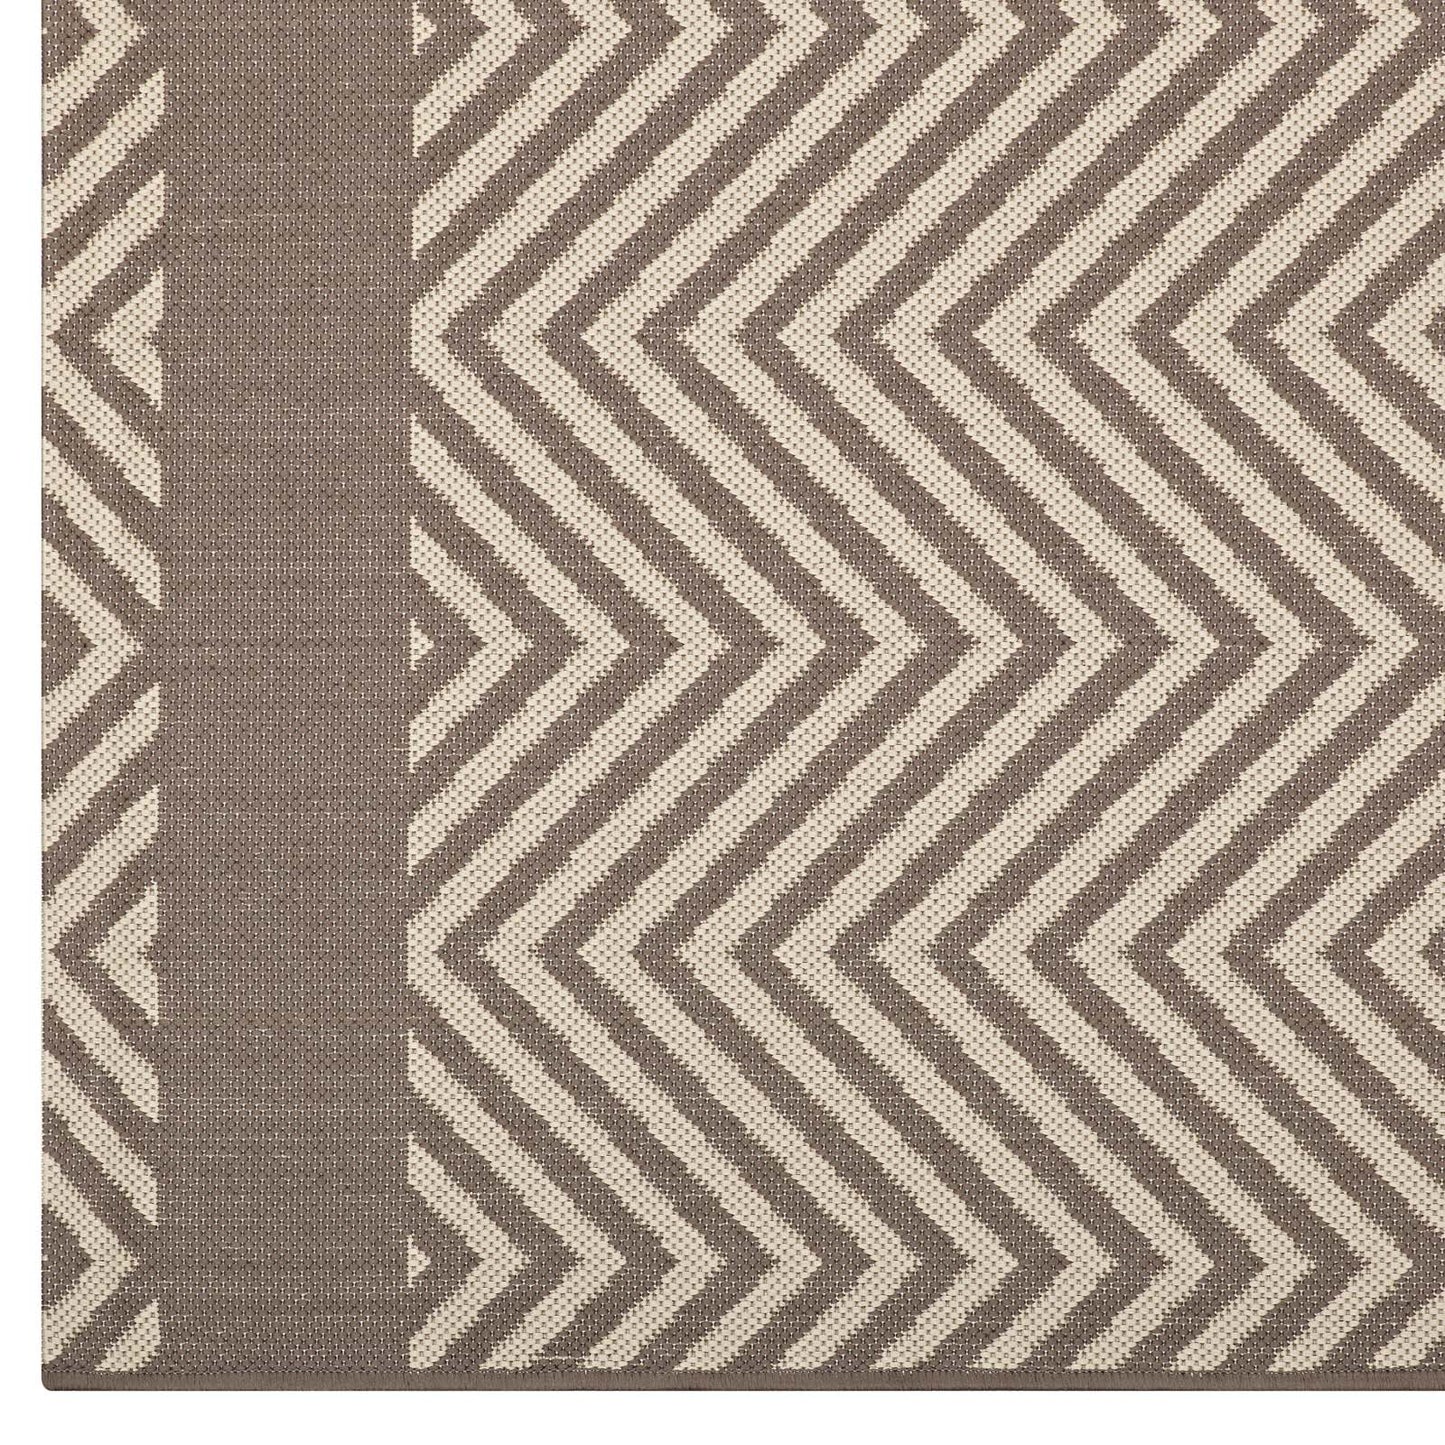 Alexi Chevron With End Borders Indoor and Outdoor 8x10 Area Rug